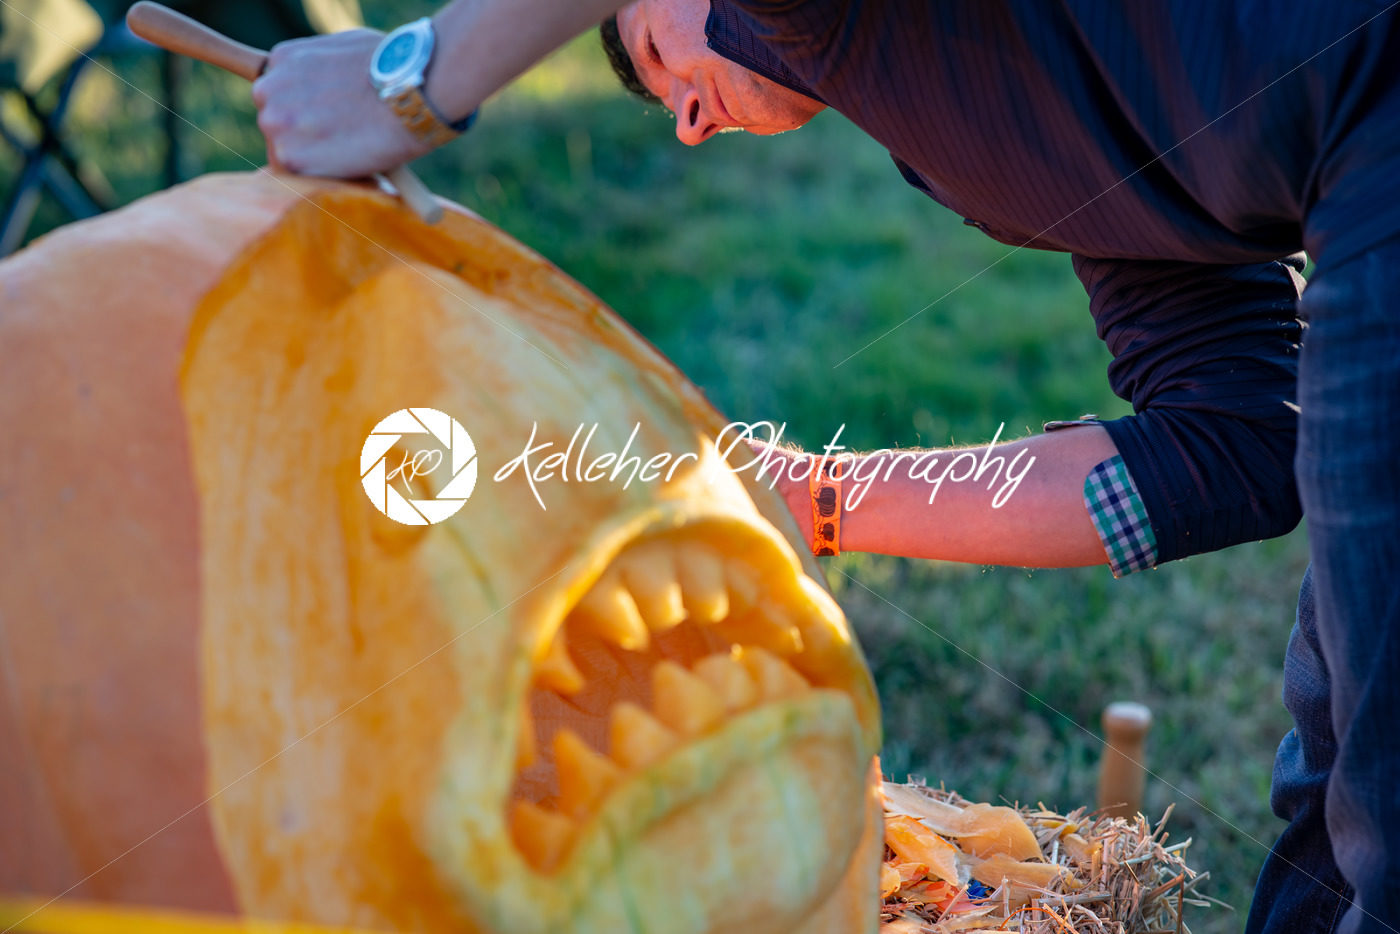 CHADDS FORD, PA – OCTOBER 18: Person carving pumpkin at The Great Pumpkin Carve carving contest on October 18, 2018 - Kelleher Photography Store